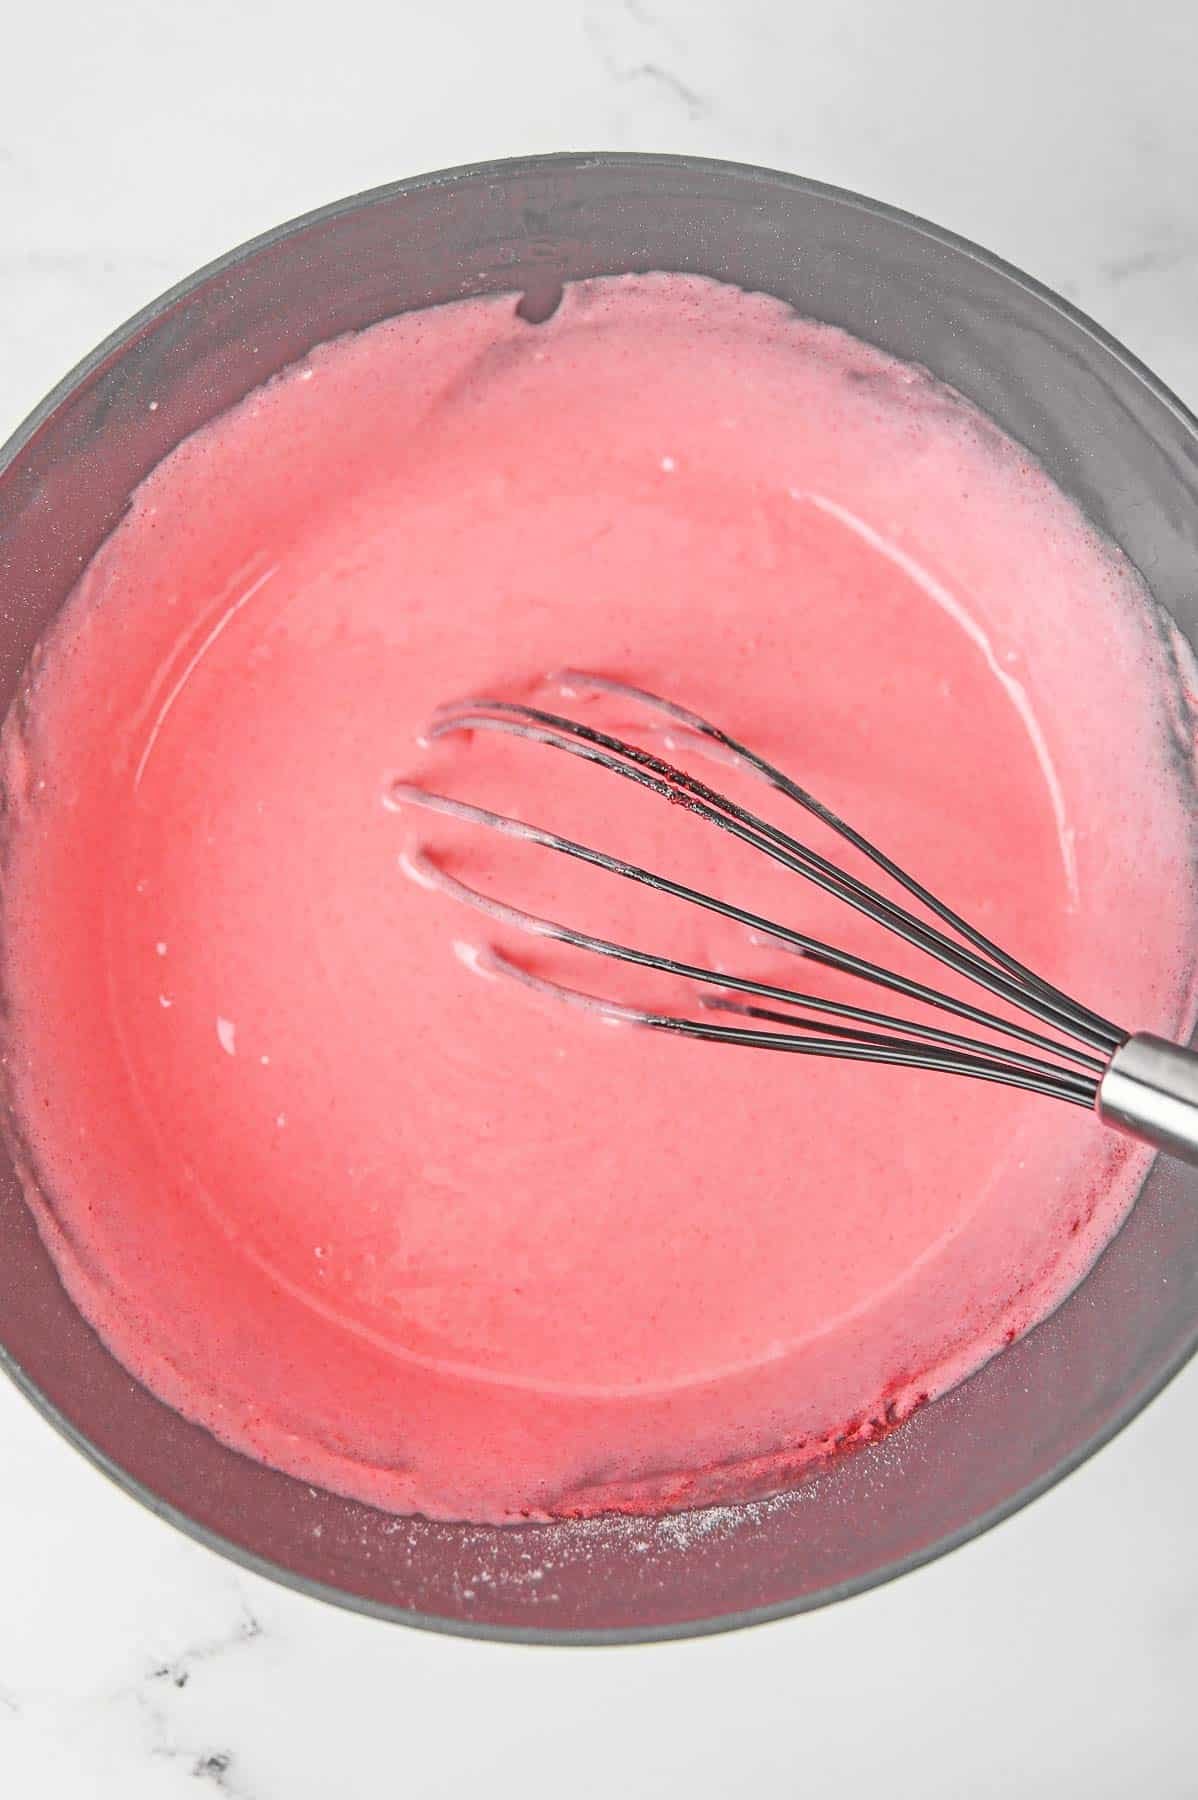 Strawberry jello added to cake mix in large mixing bowl.